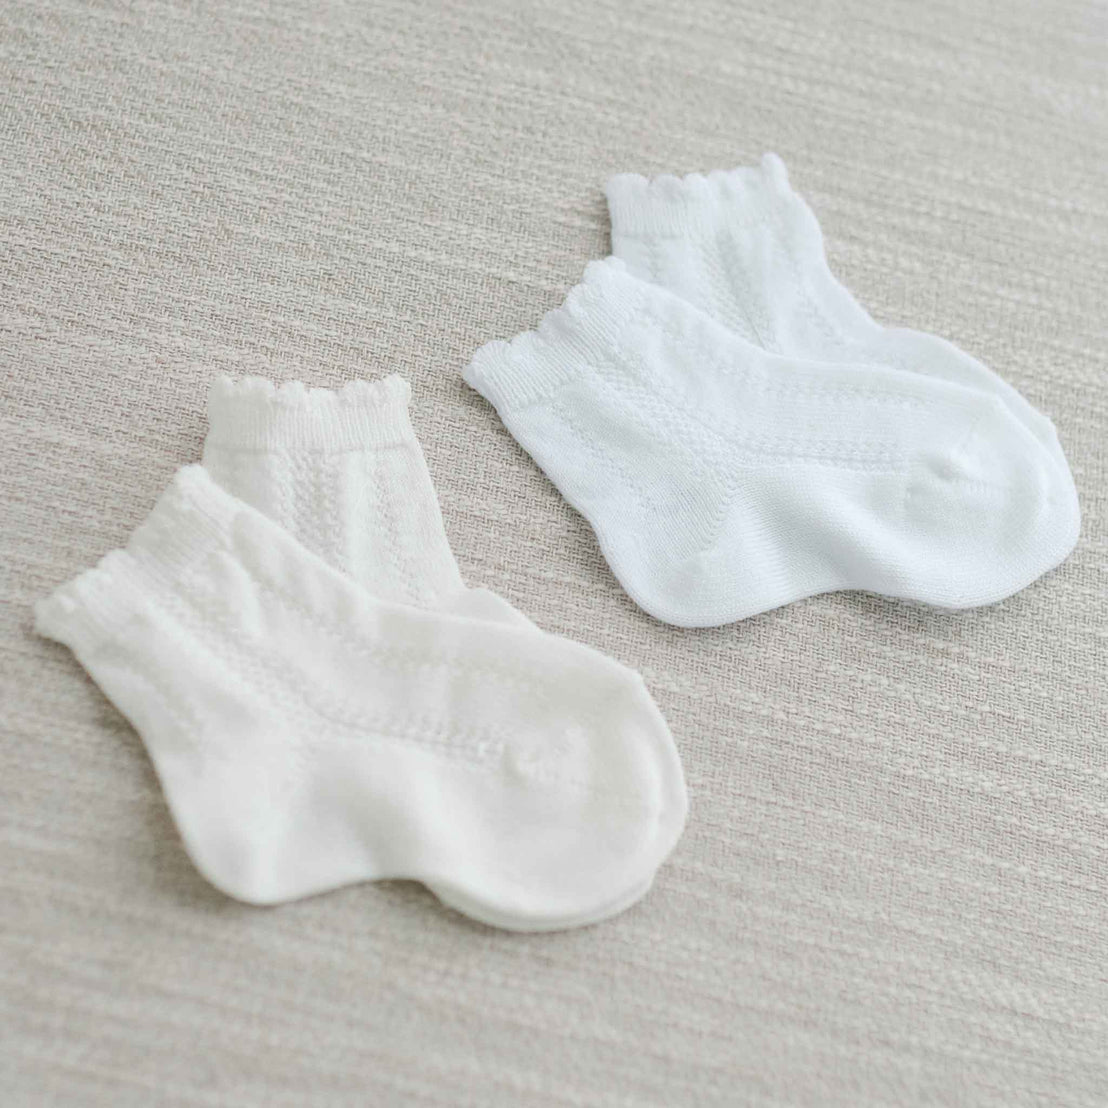 Two pairs of small white Pattern Socks with scalloped cuffs are laid flat against a light beige textured fabric surface.